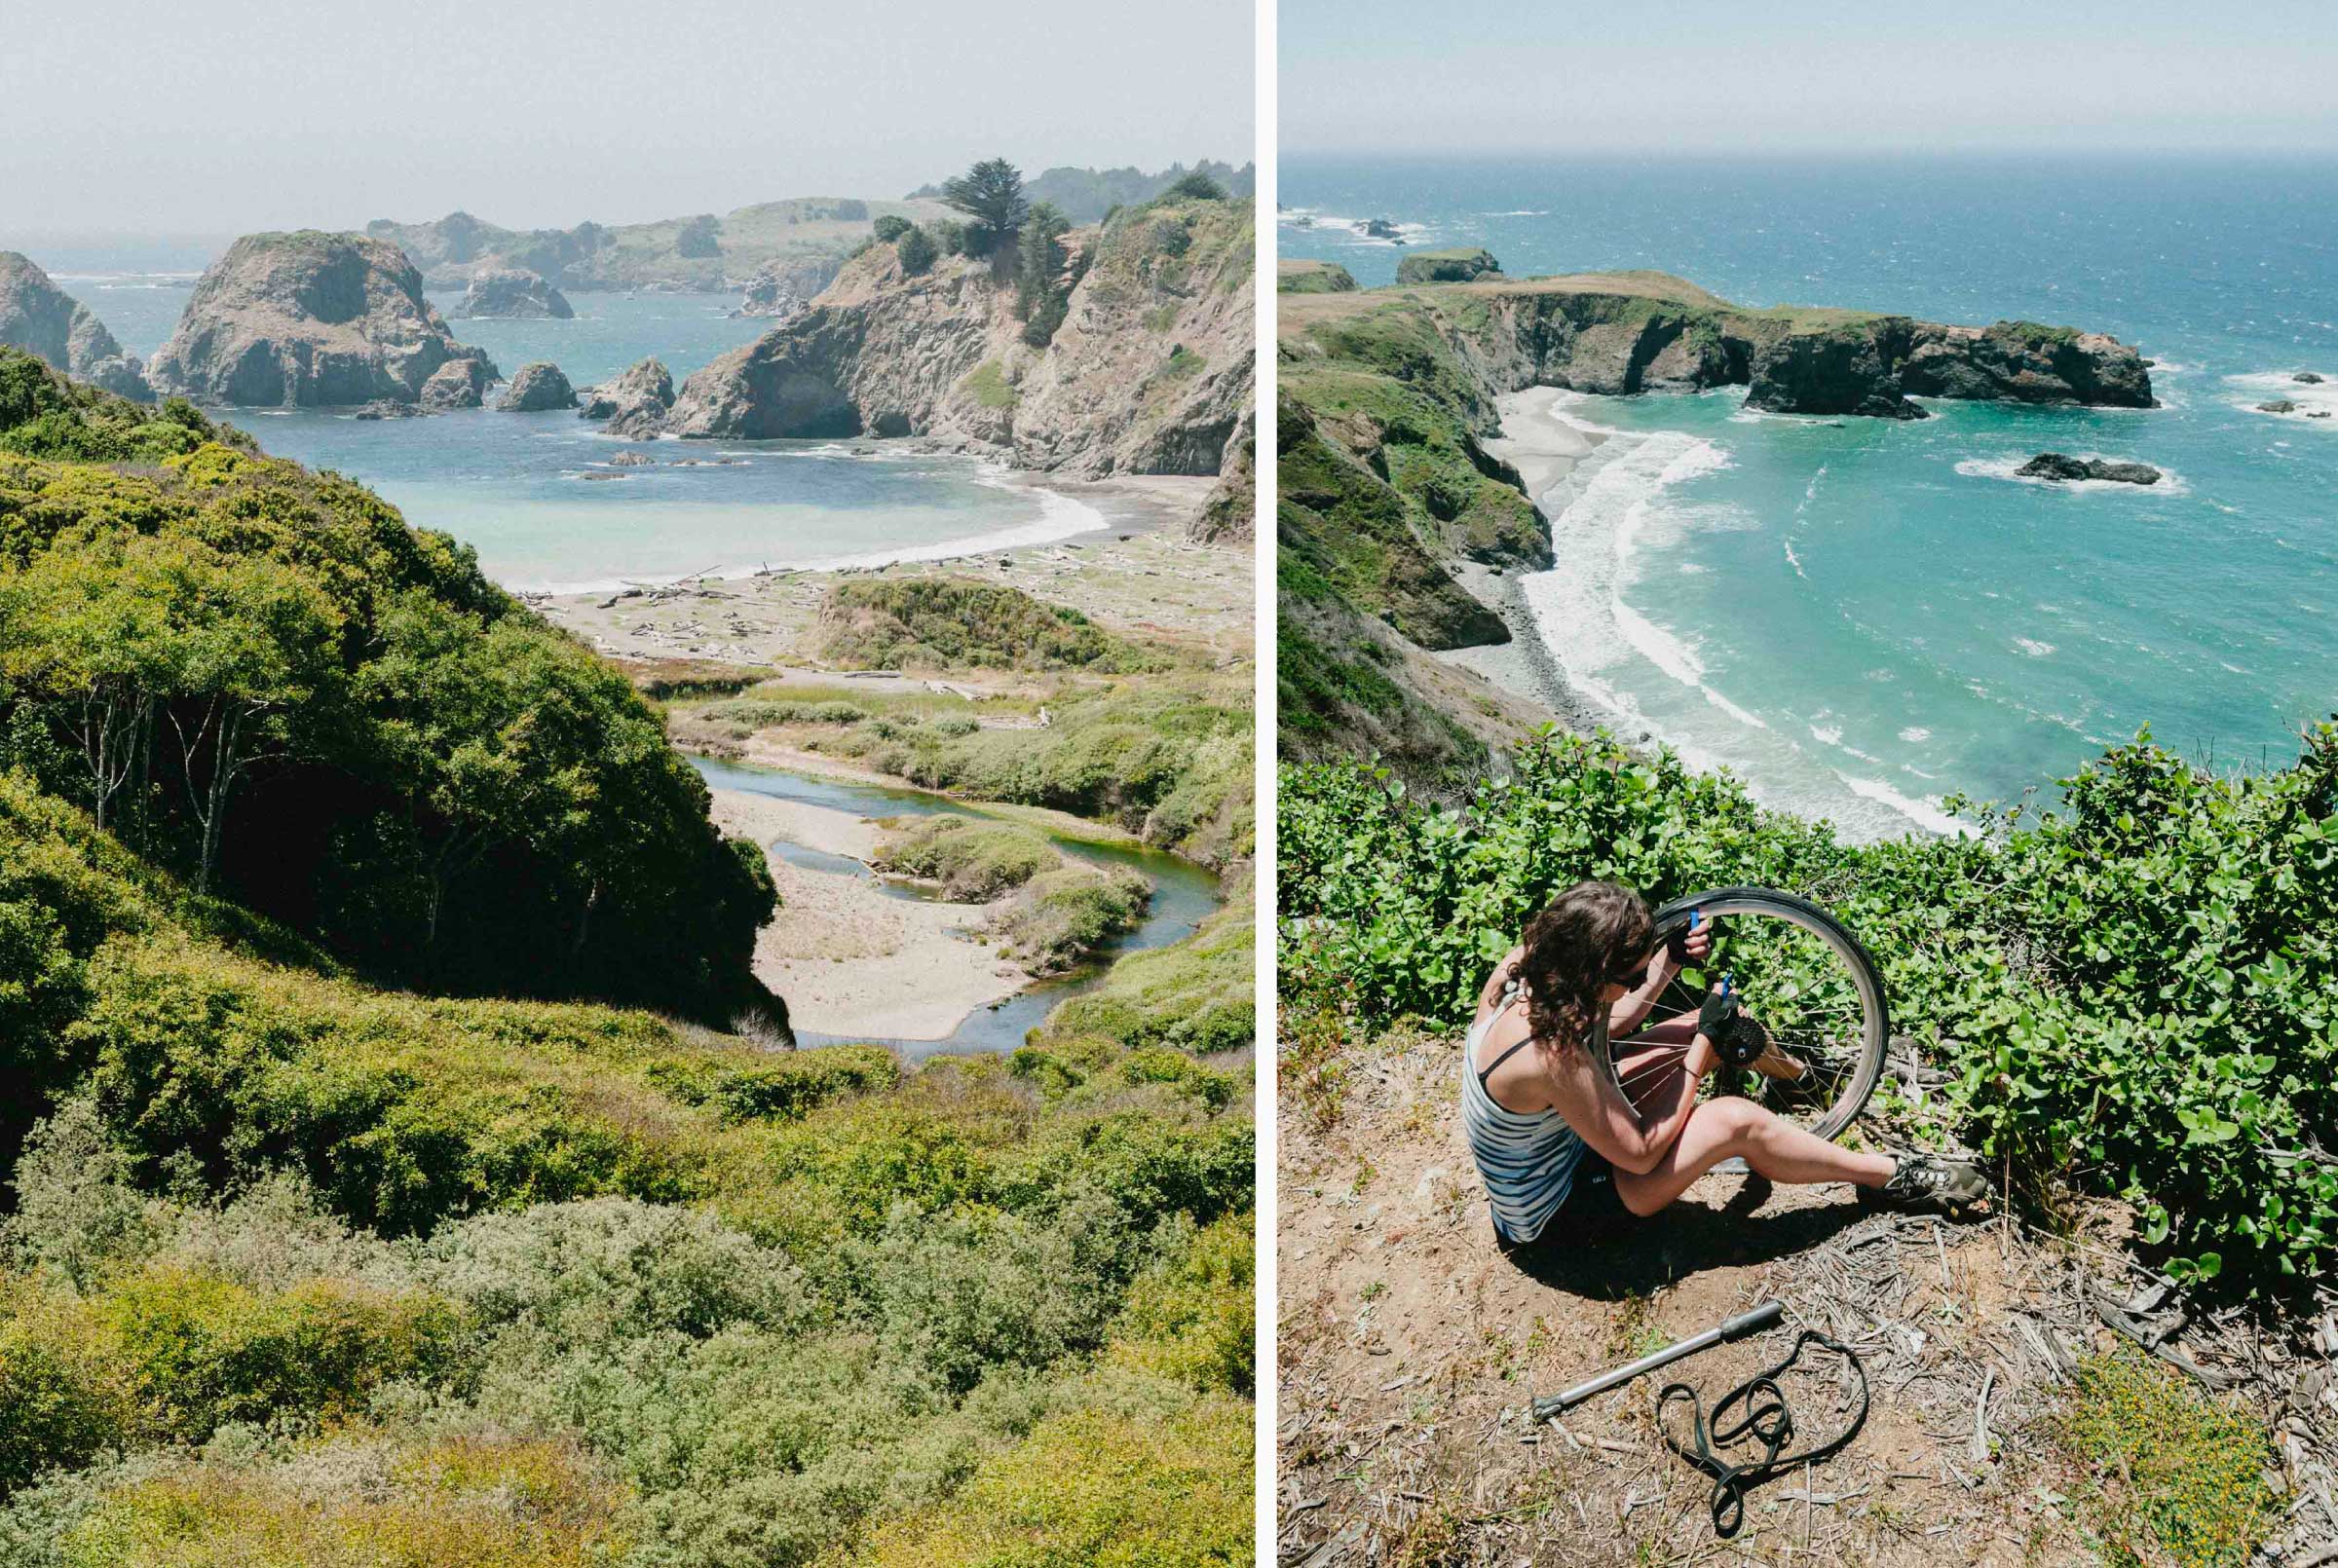 Fixing flat tires on the dramatic coast of California